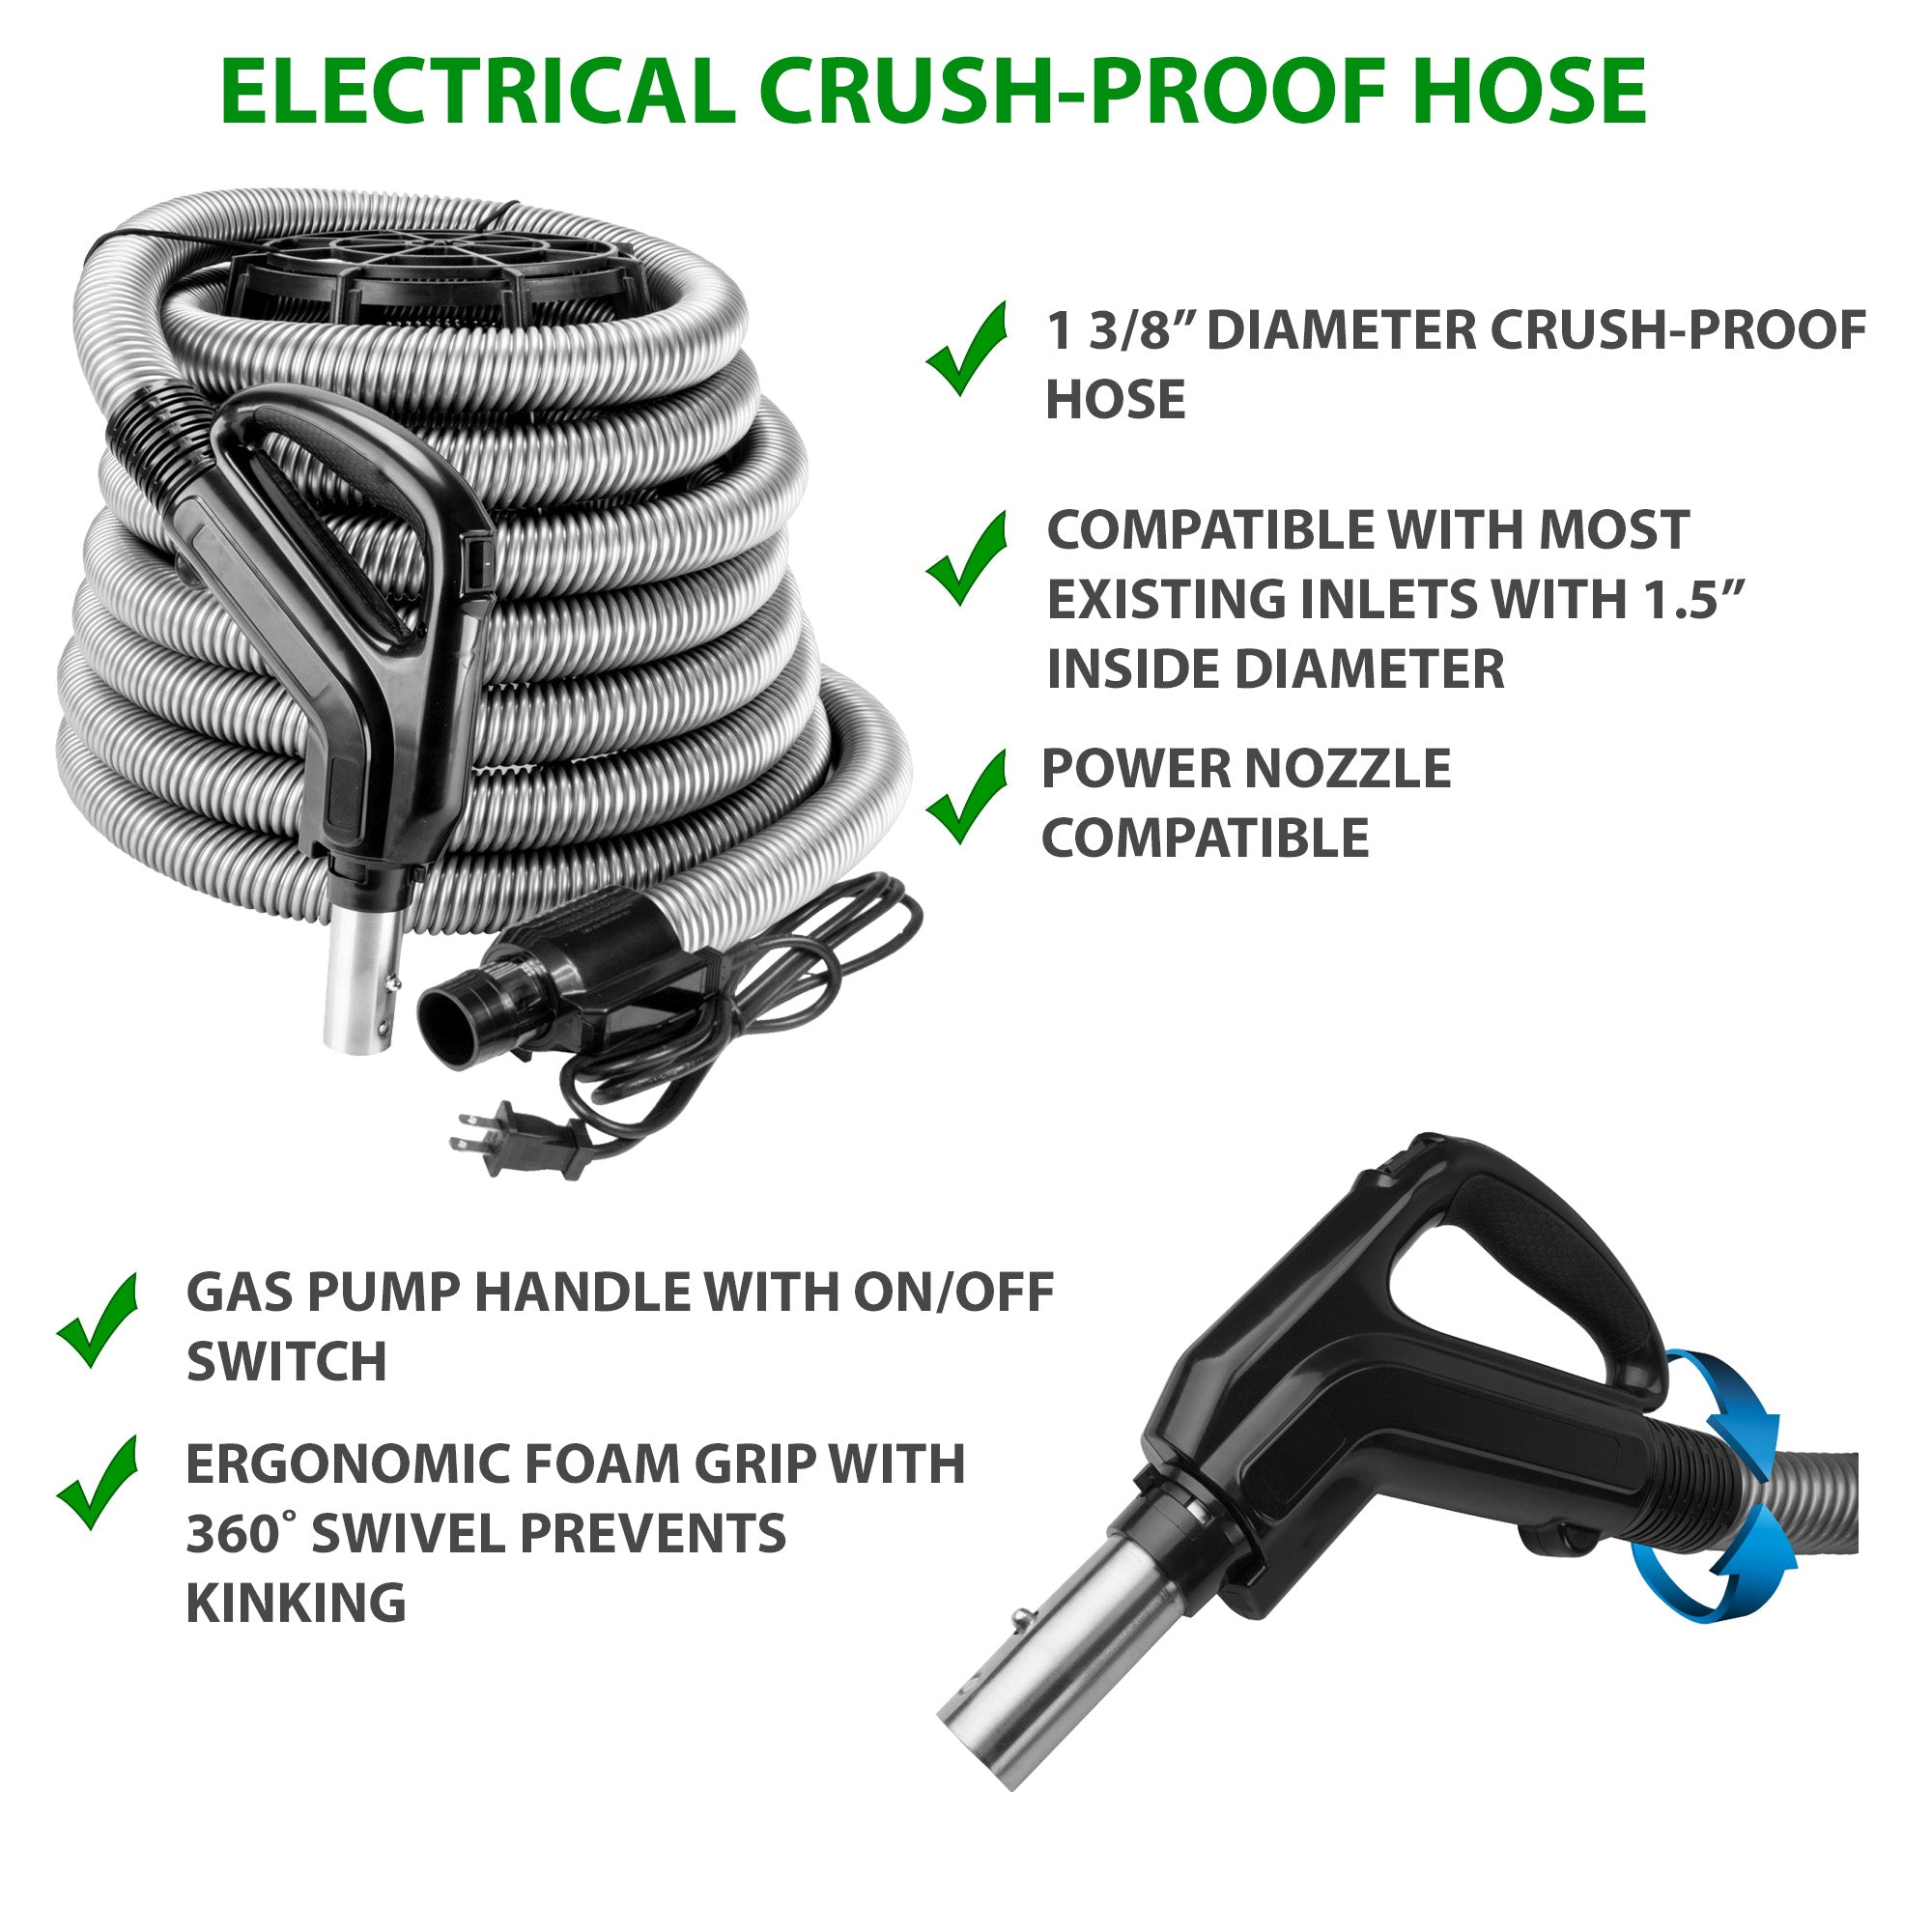 DrainVac G2-008 Central Vacuum Cleaner | 800 Air Watts Motor | Basic Electric Package